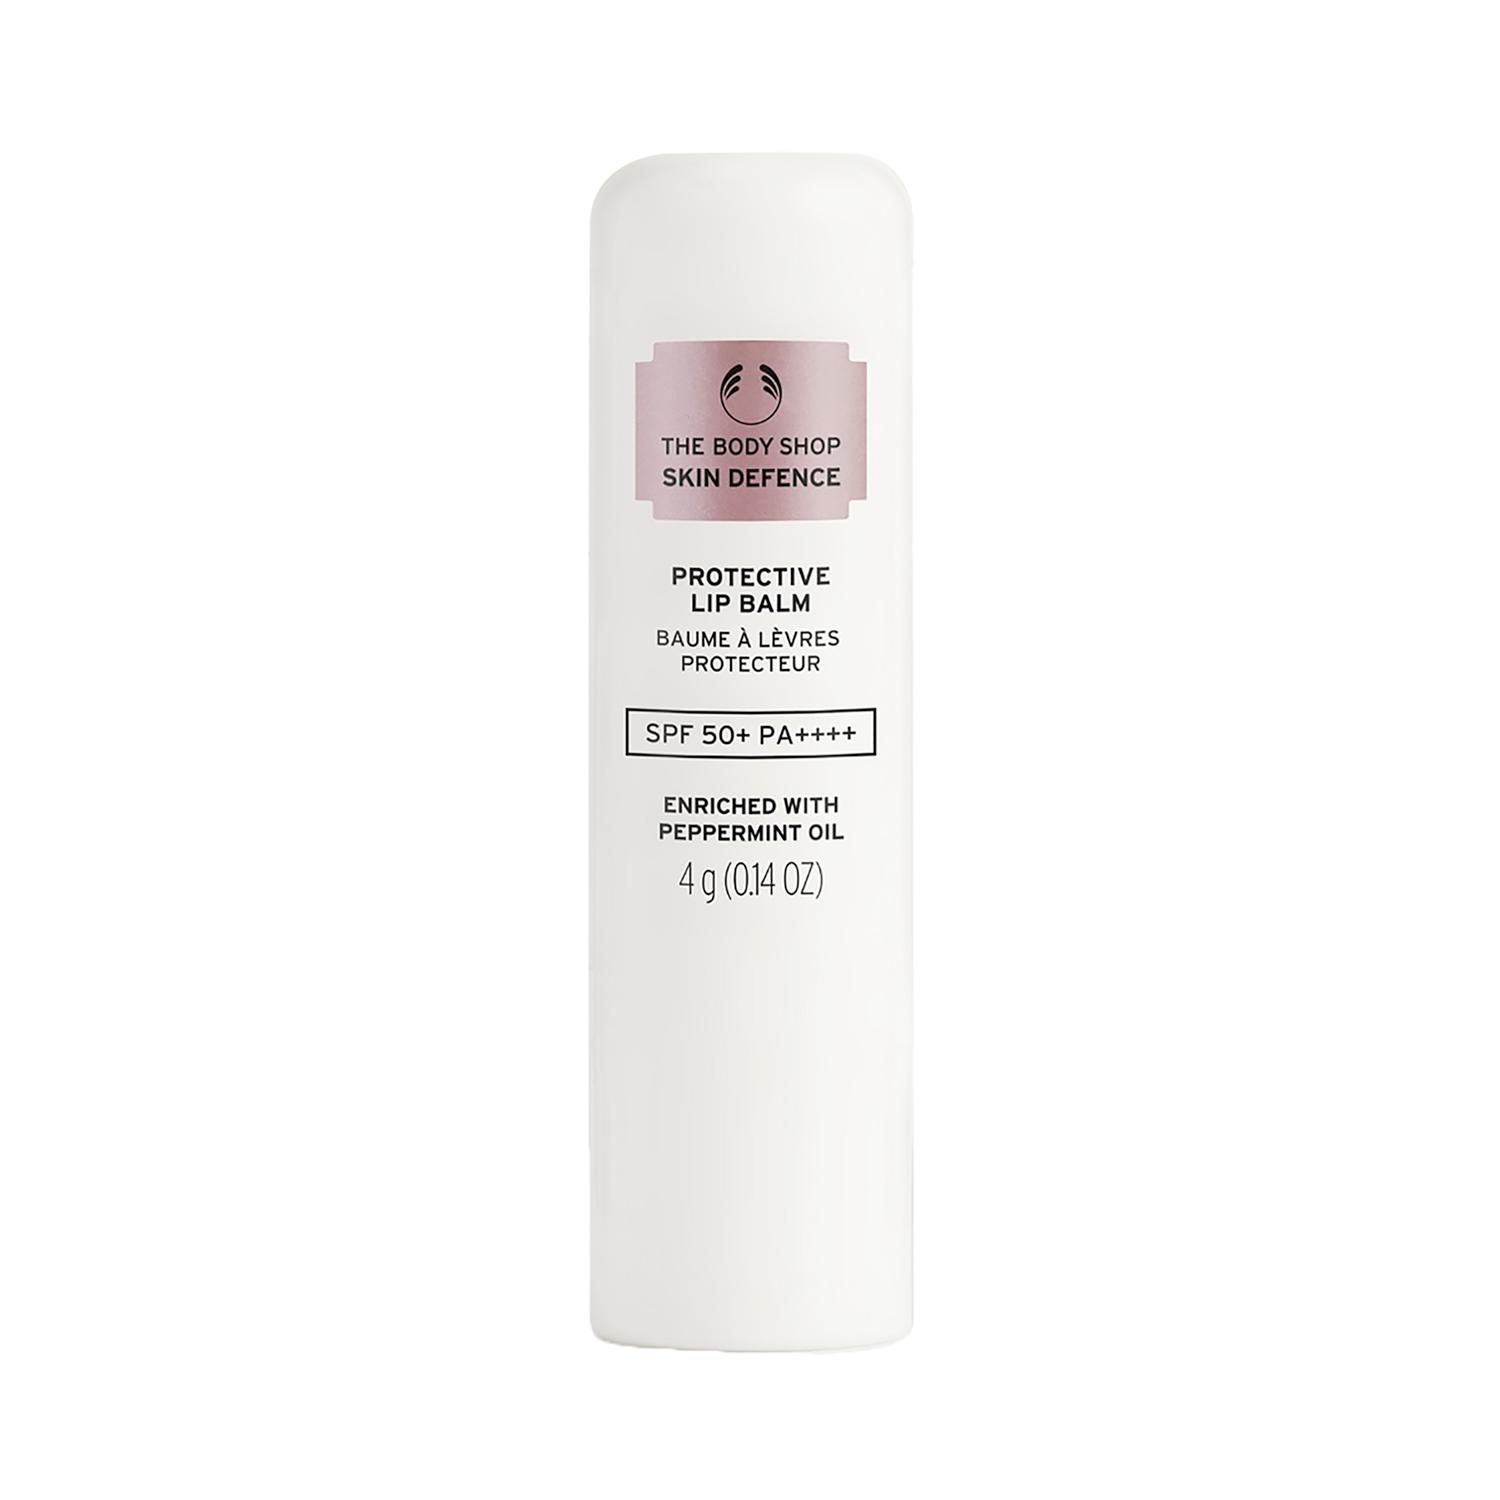 The Body Shop Skin Defence Protective Lip Balm SPF 50+ PA++++ (4g)